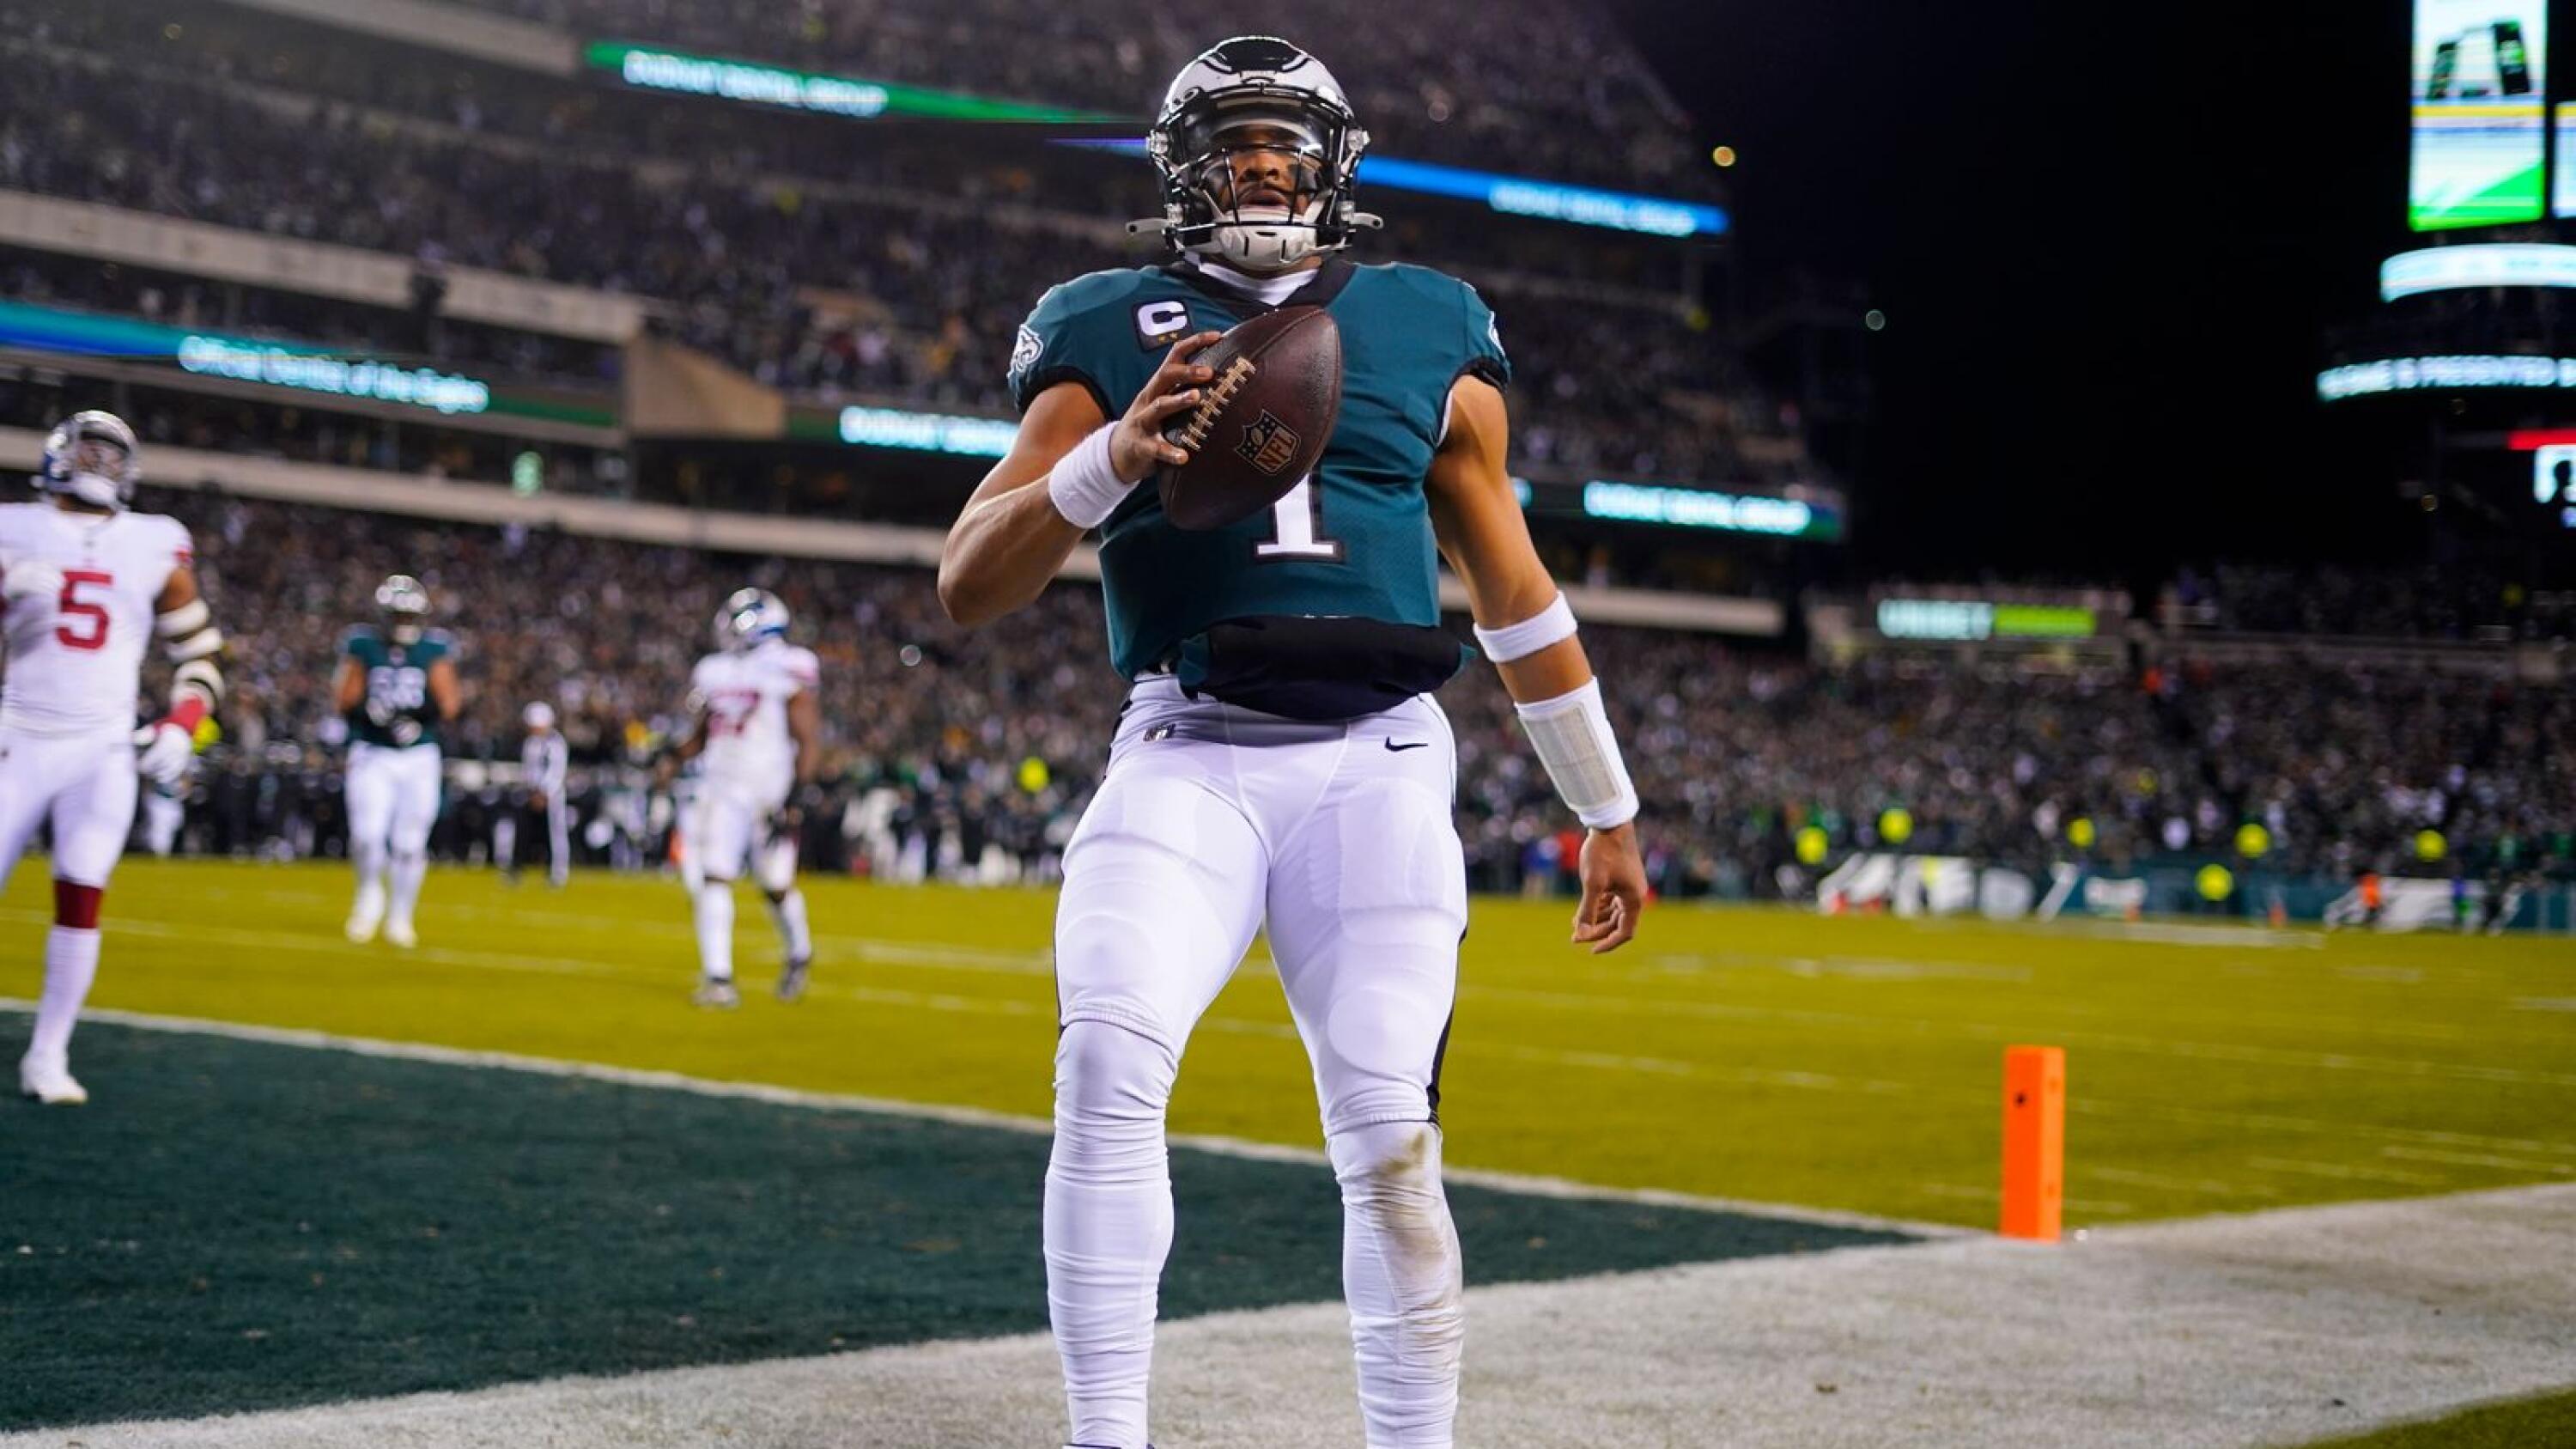 Touchdown Jalen Hurts, Giants 0-27 Eagles, Divisional Playoff